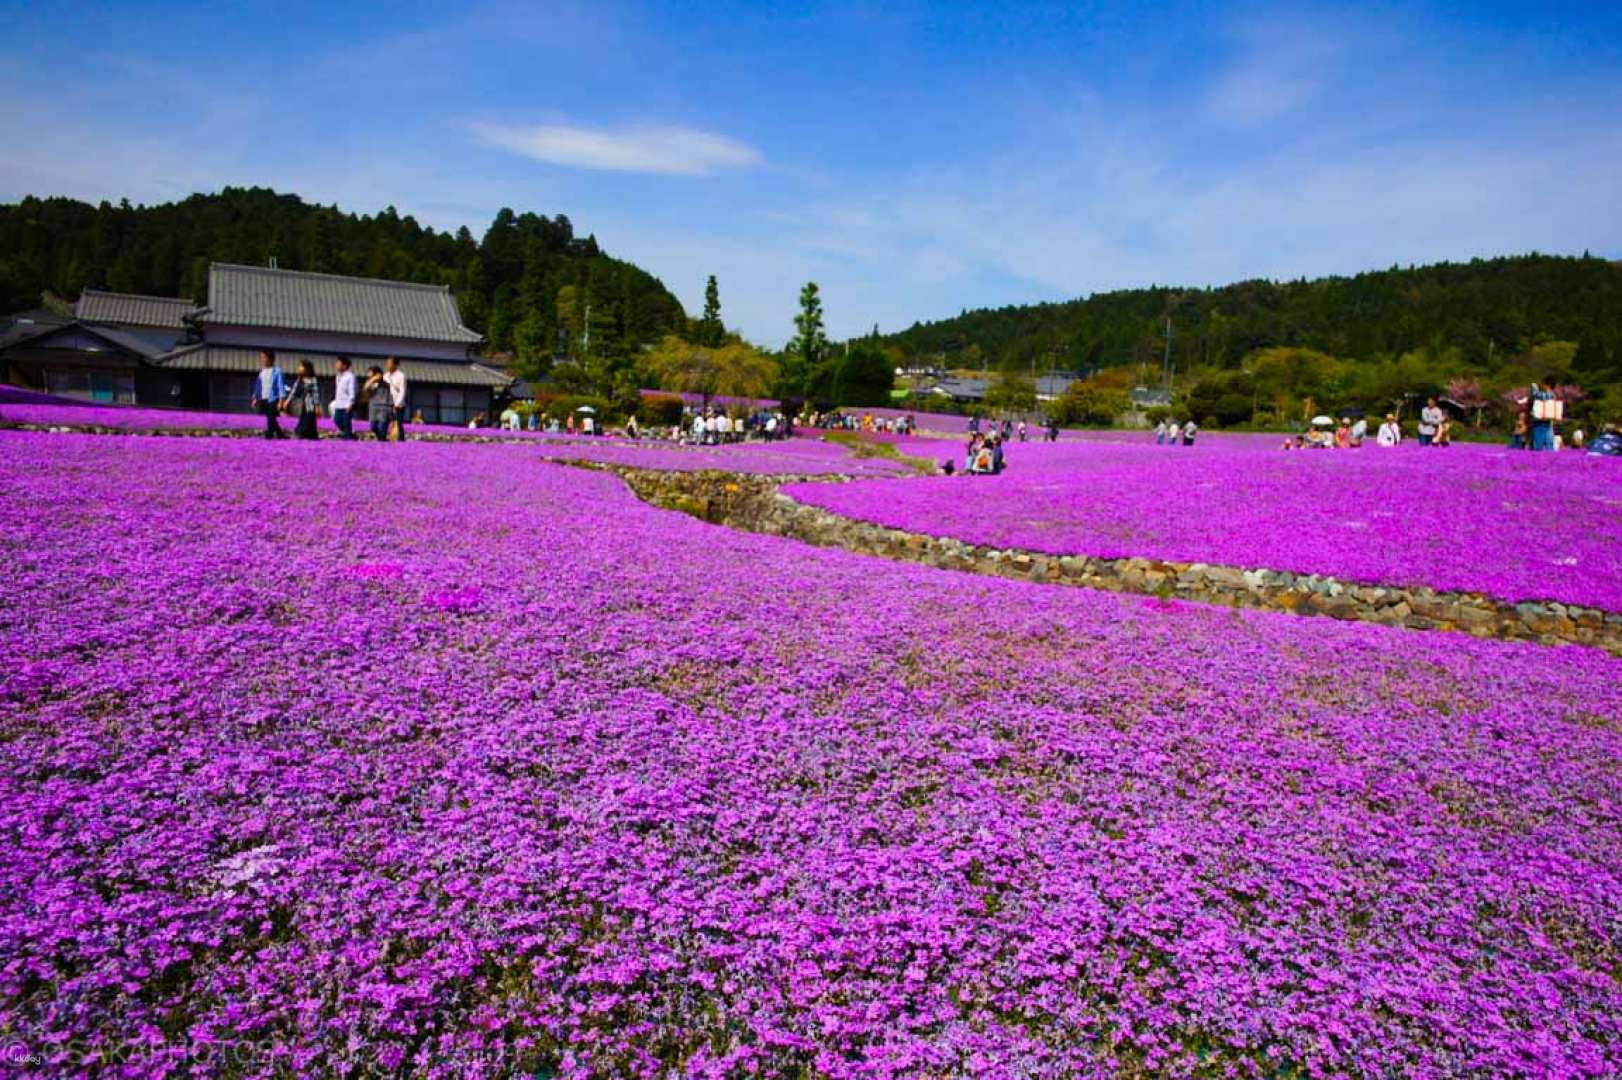 [Limited time limit] One-day cherry blossom viewing tour｜Mita City Shibazakura Garden and Pekoji Temple｜Romantic pink Shibazakura and dreamy wisteria flowers in spring｜Includes hotel buffet lunch, optional kimono purchase experience (departing from Osaka)